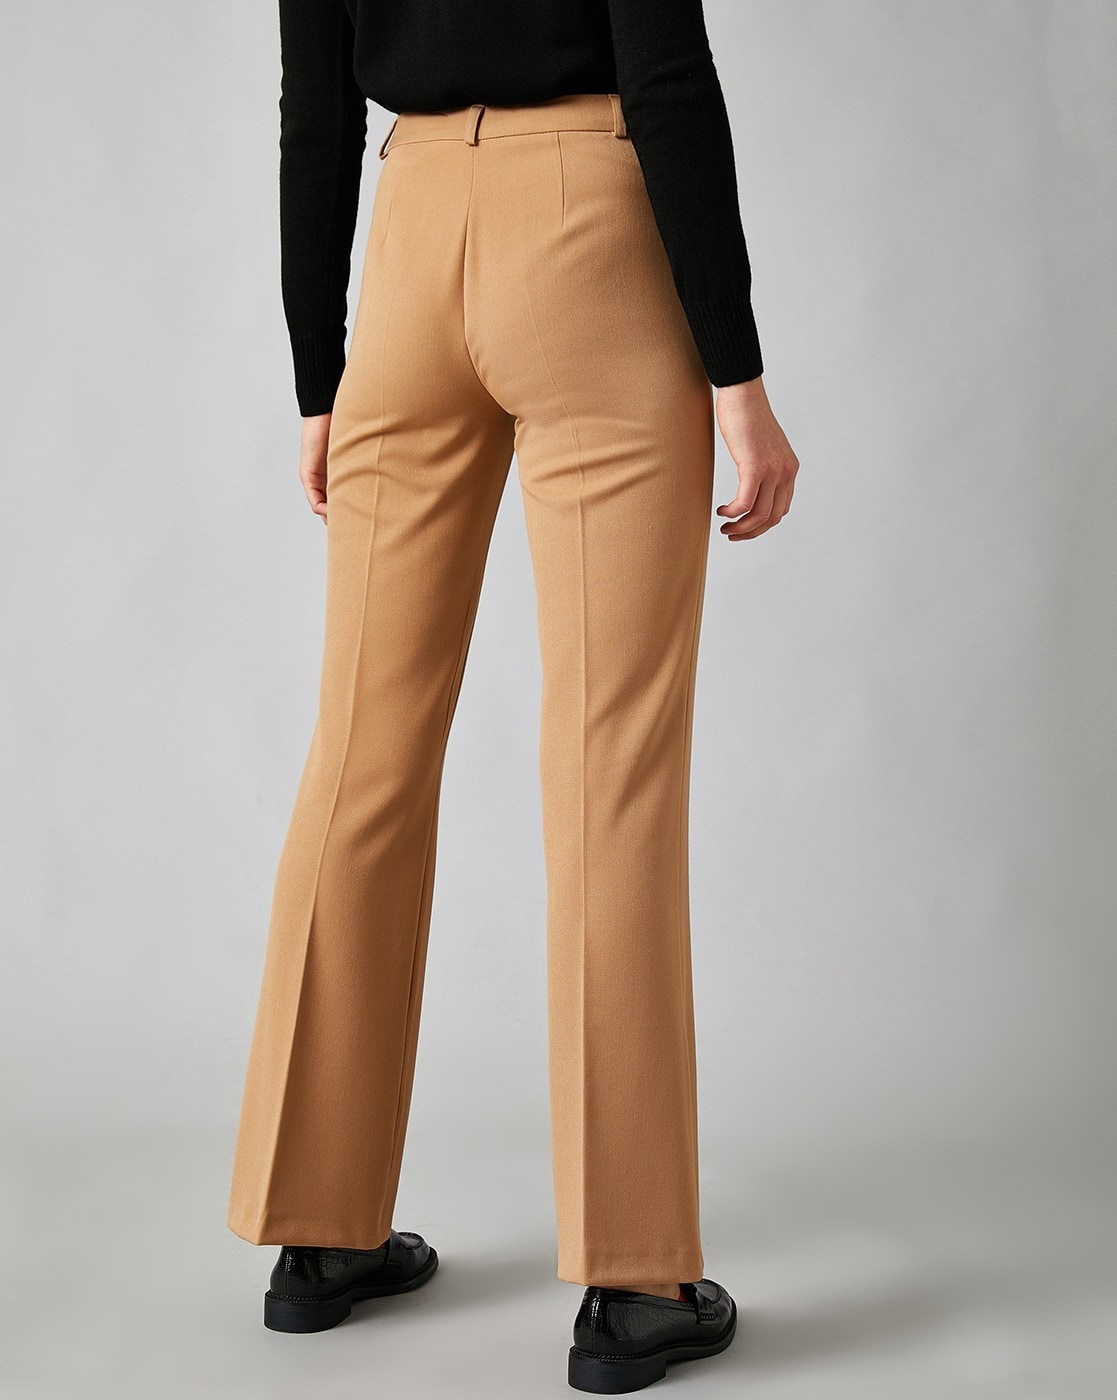 Trousers  Shorts  Cotton Traders Womens Ultra Stretch Seamed Crop Trousers  Camel  AKMV Shahabad